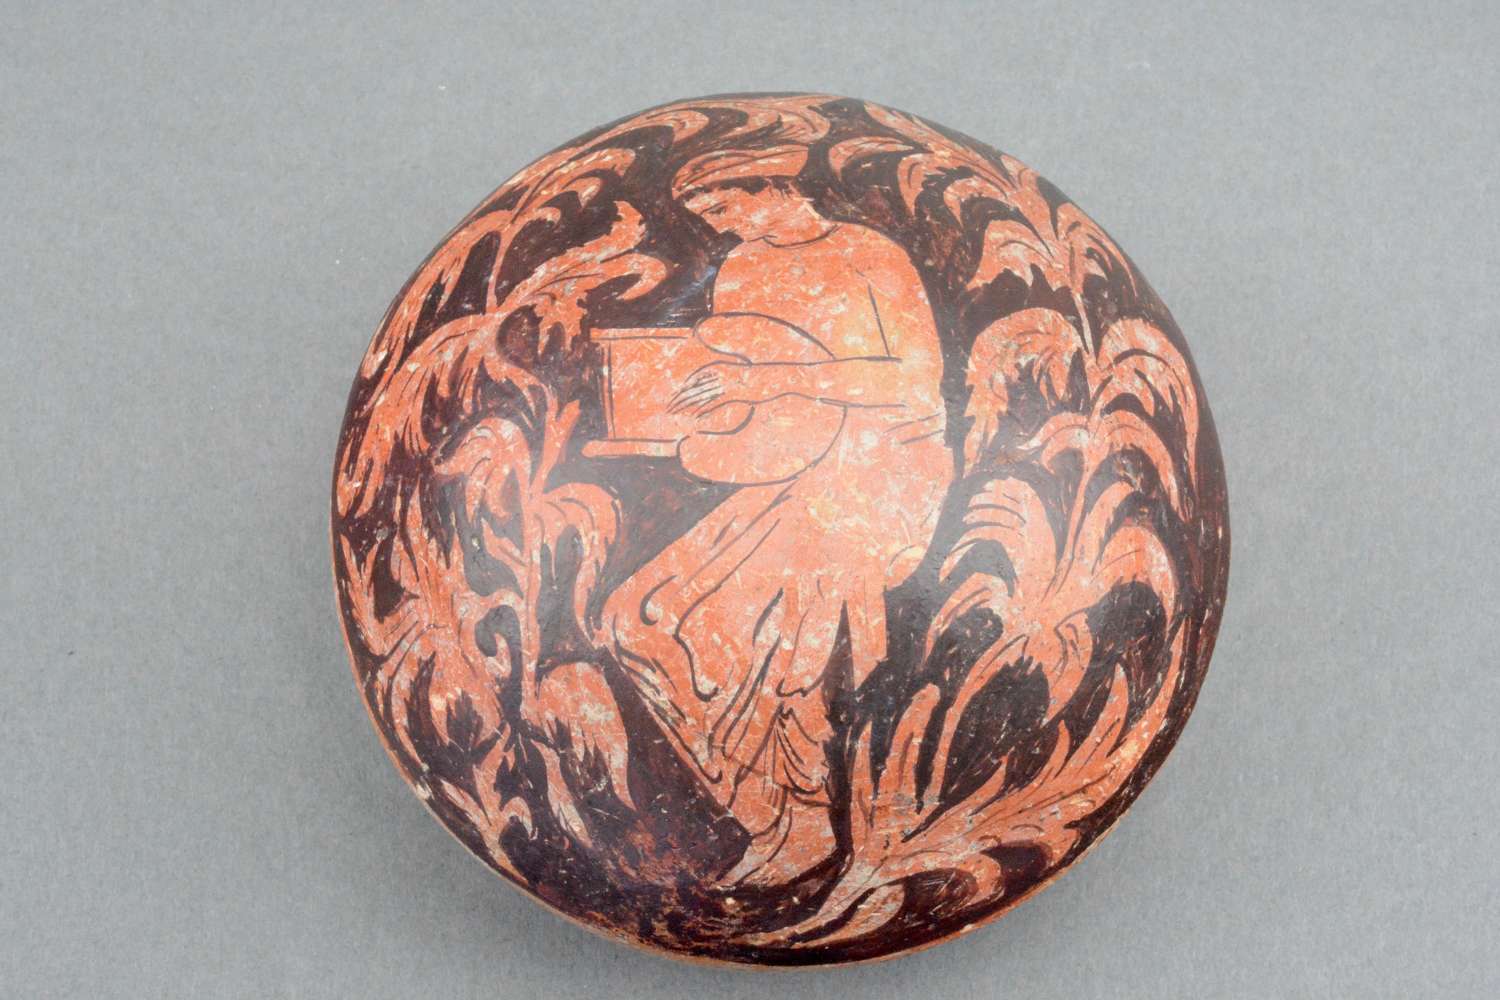 An ancient Greek decorated pottery pot lid or bowl.